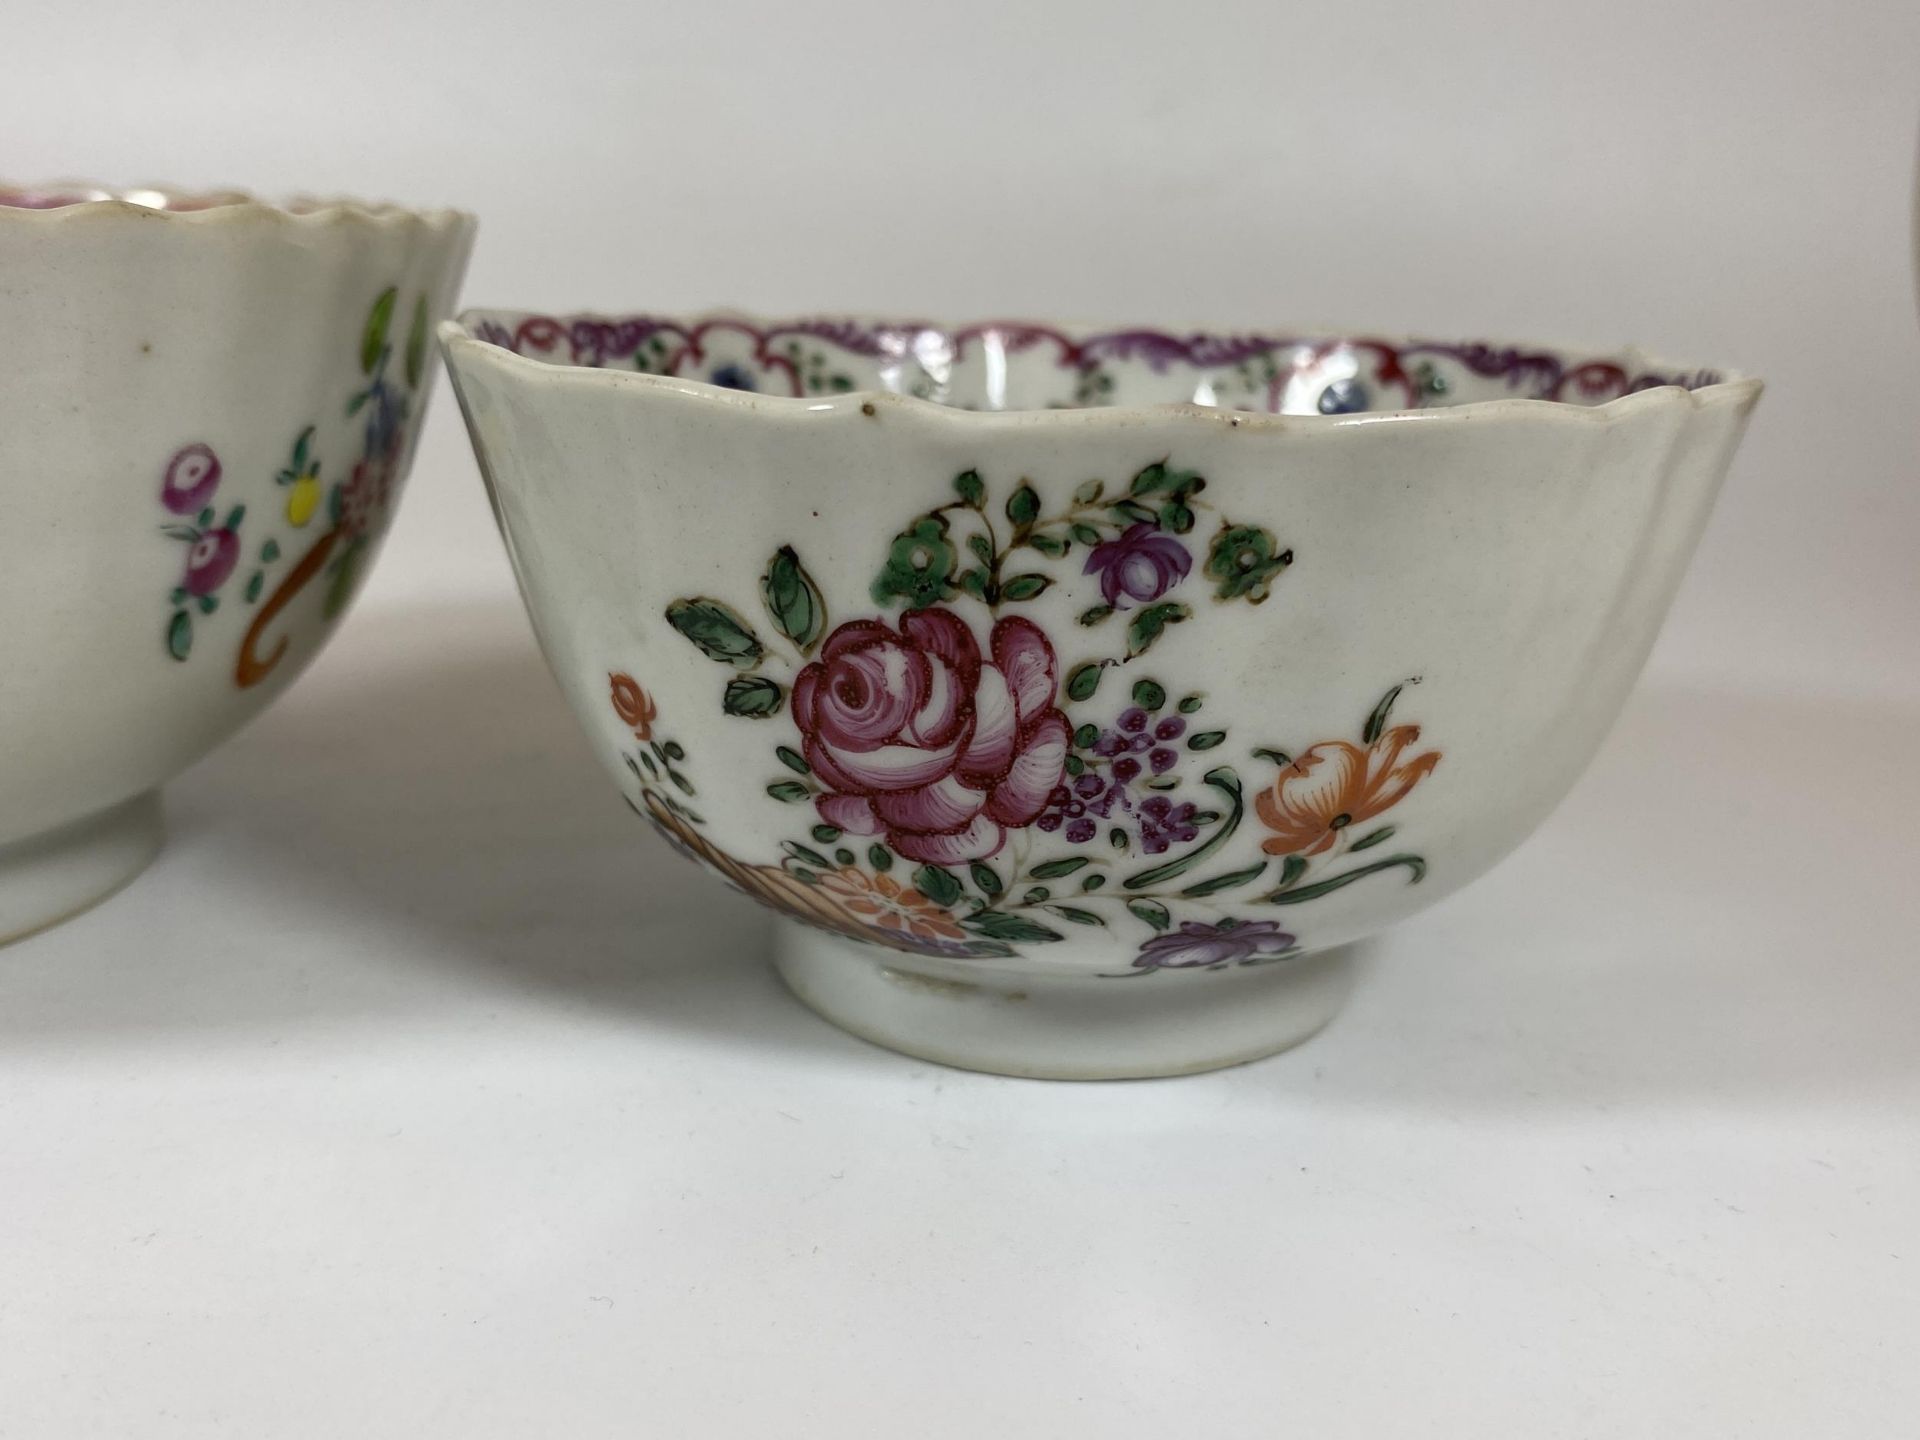 TWO 19TH CENTURY CHINESE FAMILLE ROSE BOWLS, LARGEST DIAMETER 14CM - Image 3 of 5